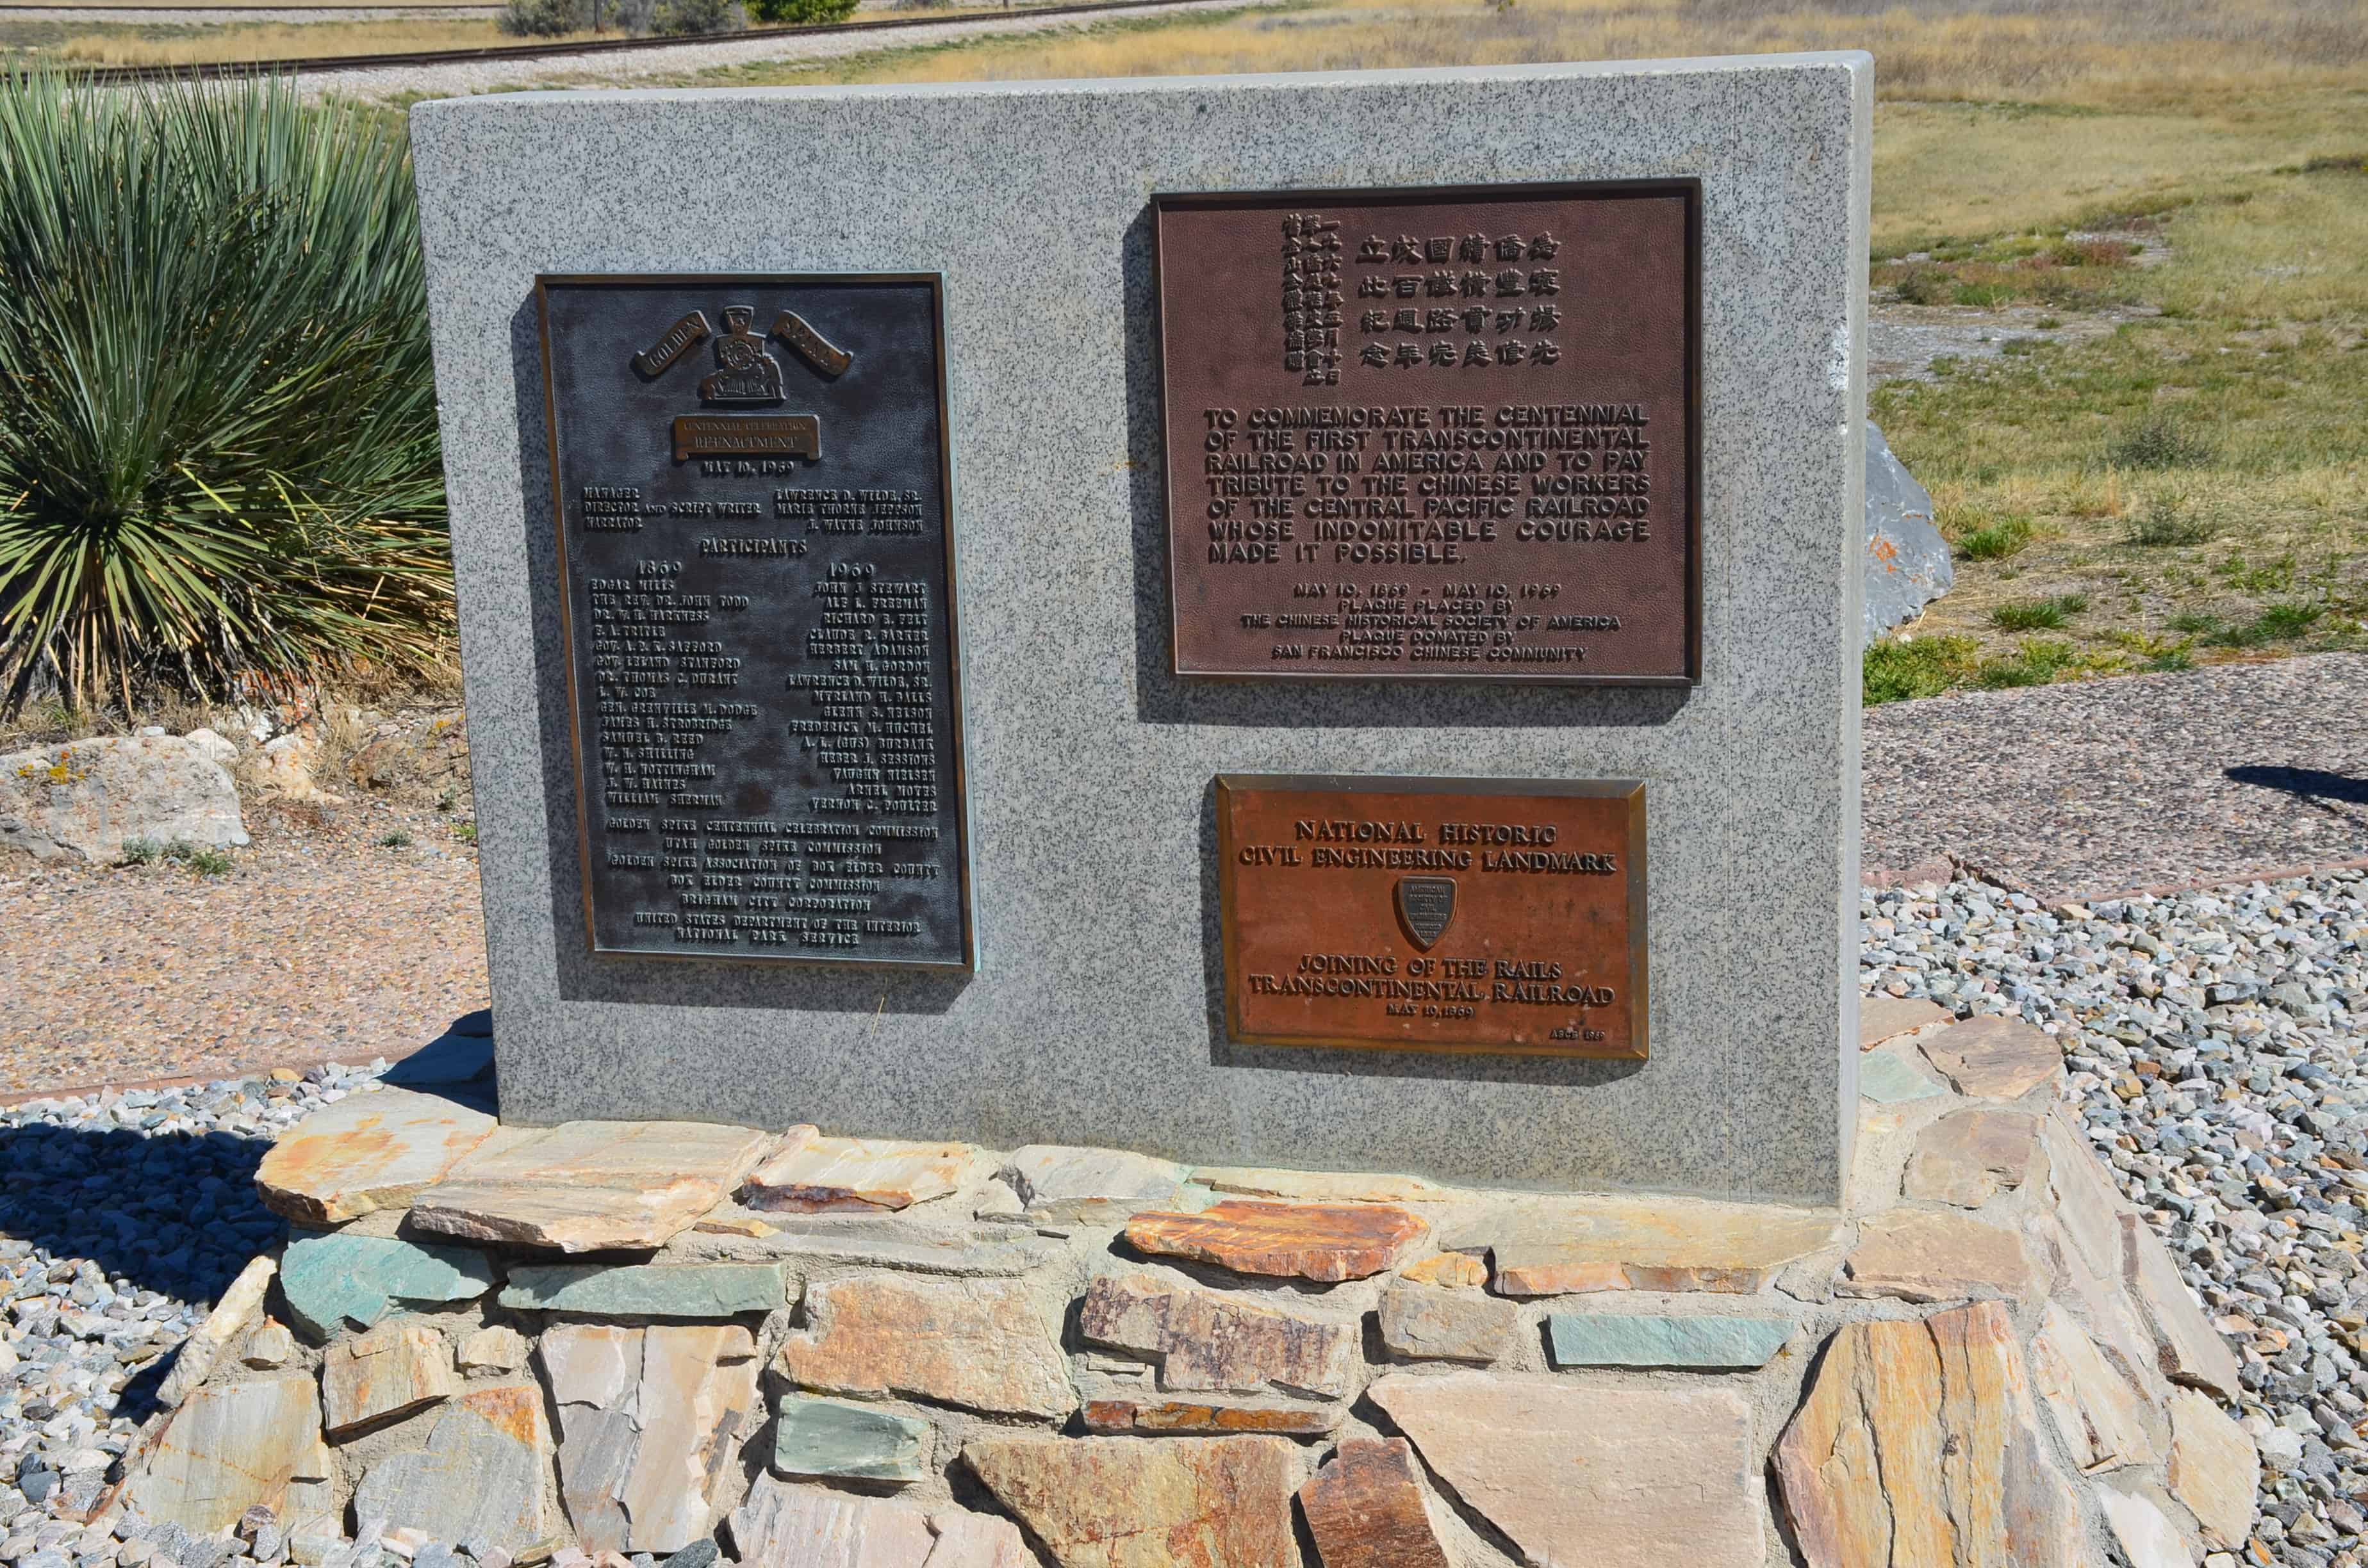 Commemoration of 100th anniversary and memorial to Chinese workers at Golden Spike National Historical Park, Promontory Summit, Utah